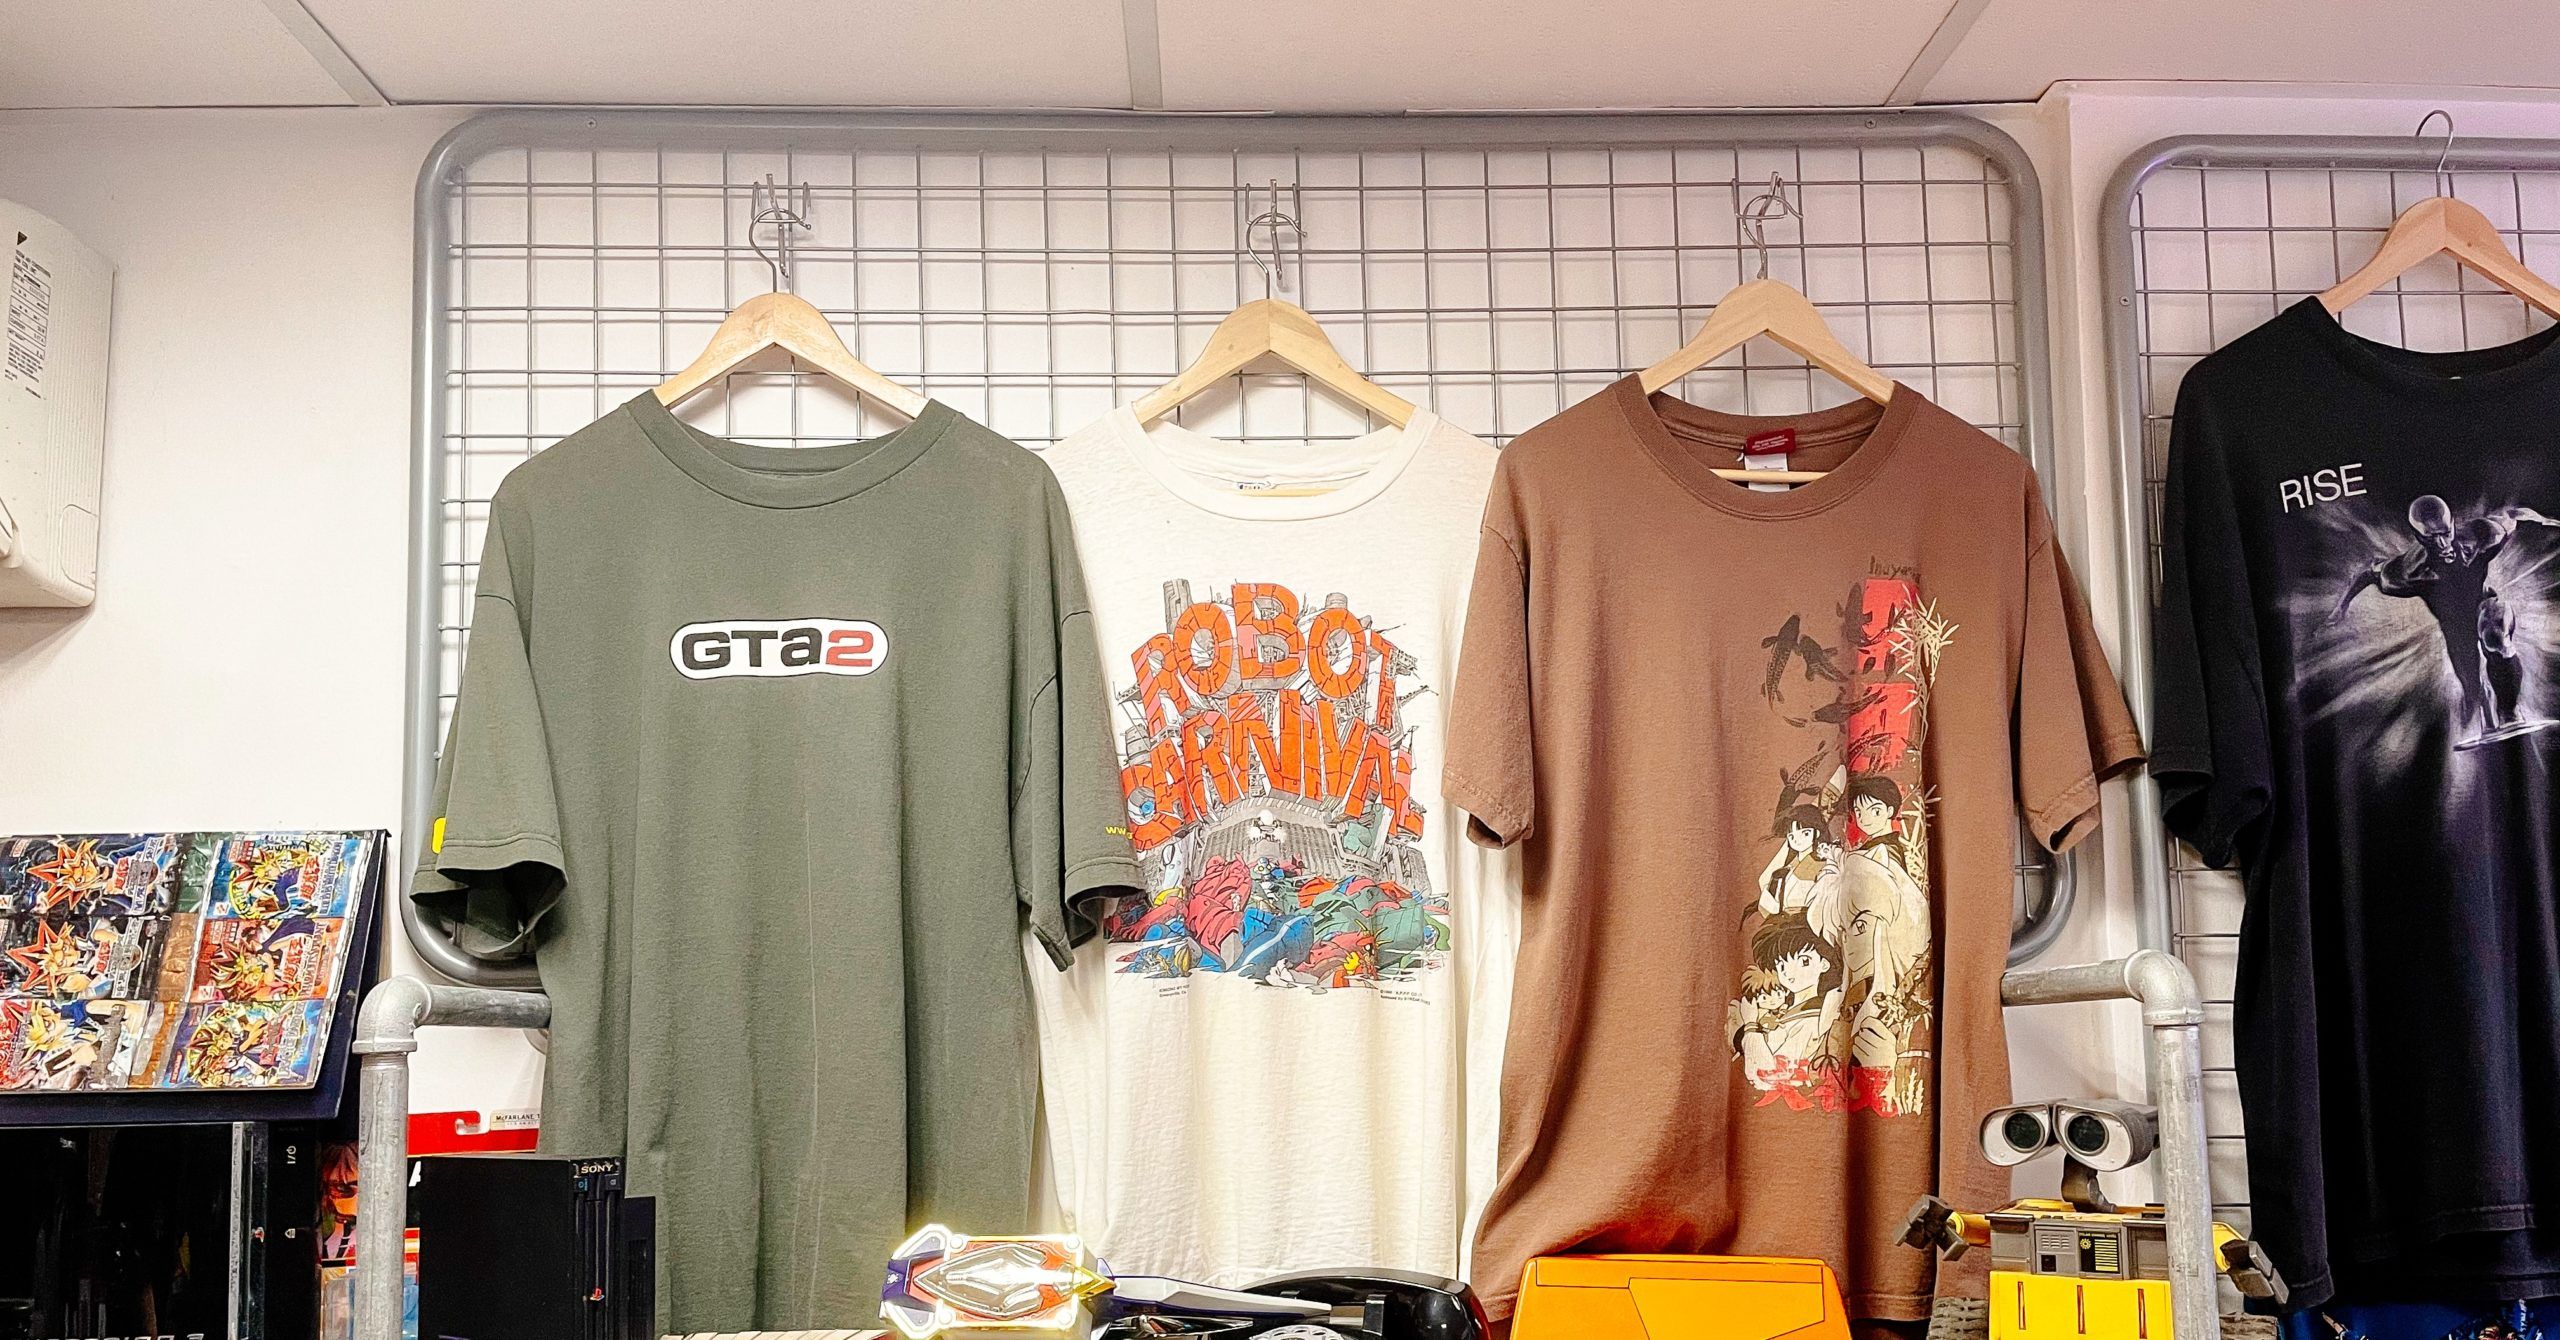 Inside Loop Garms, the Singapore vintage fashion store for everyone